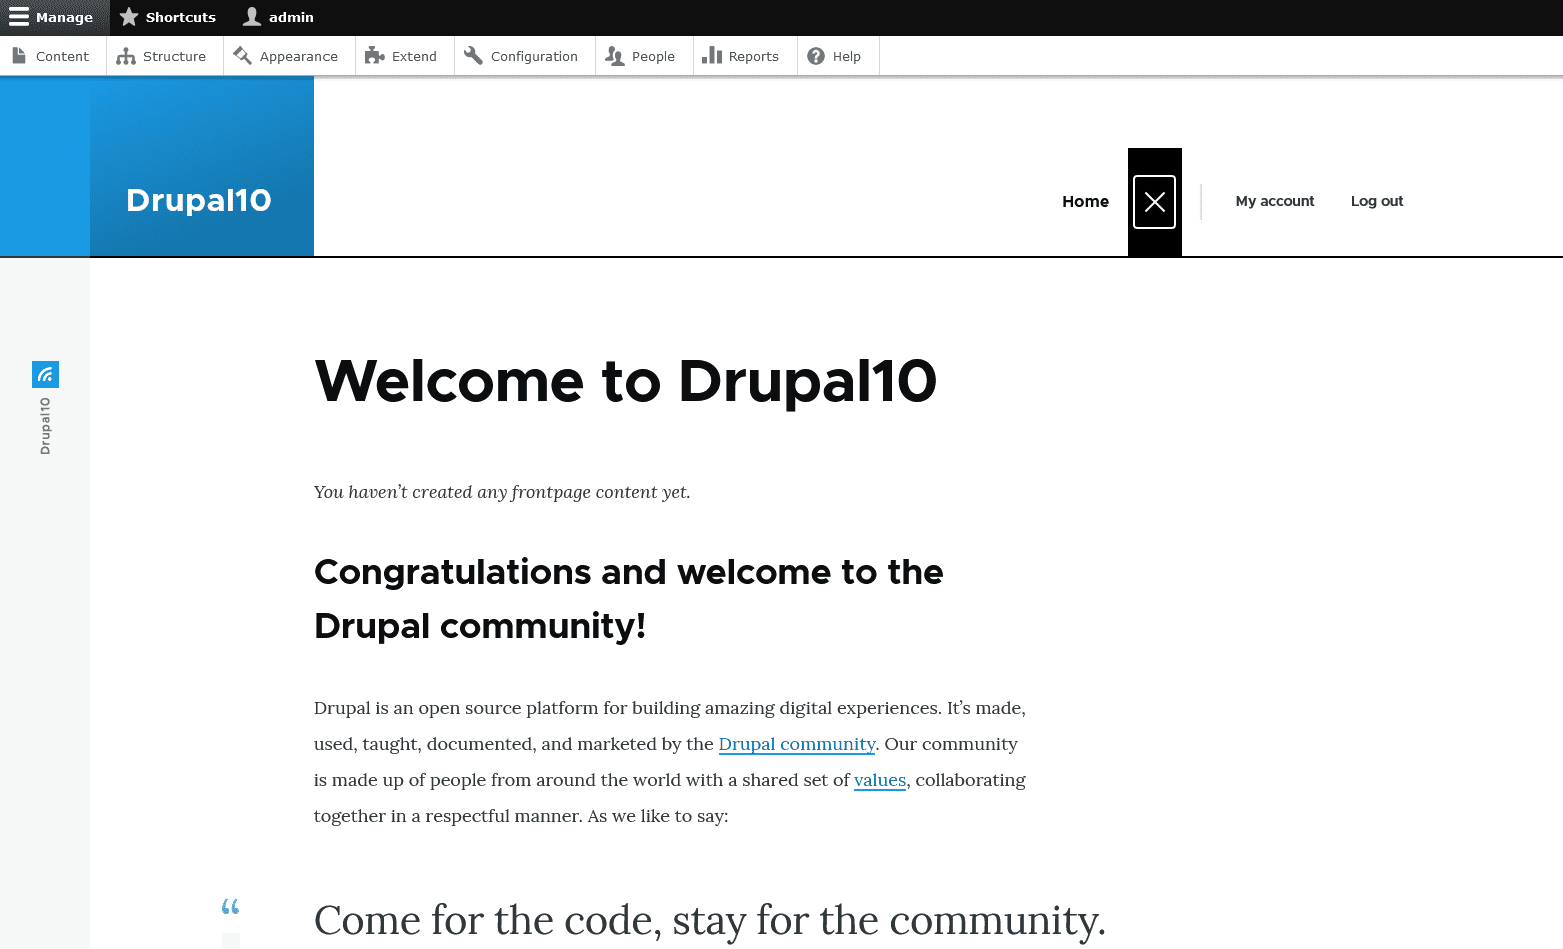 Welcome to Drupal 10